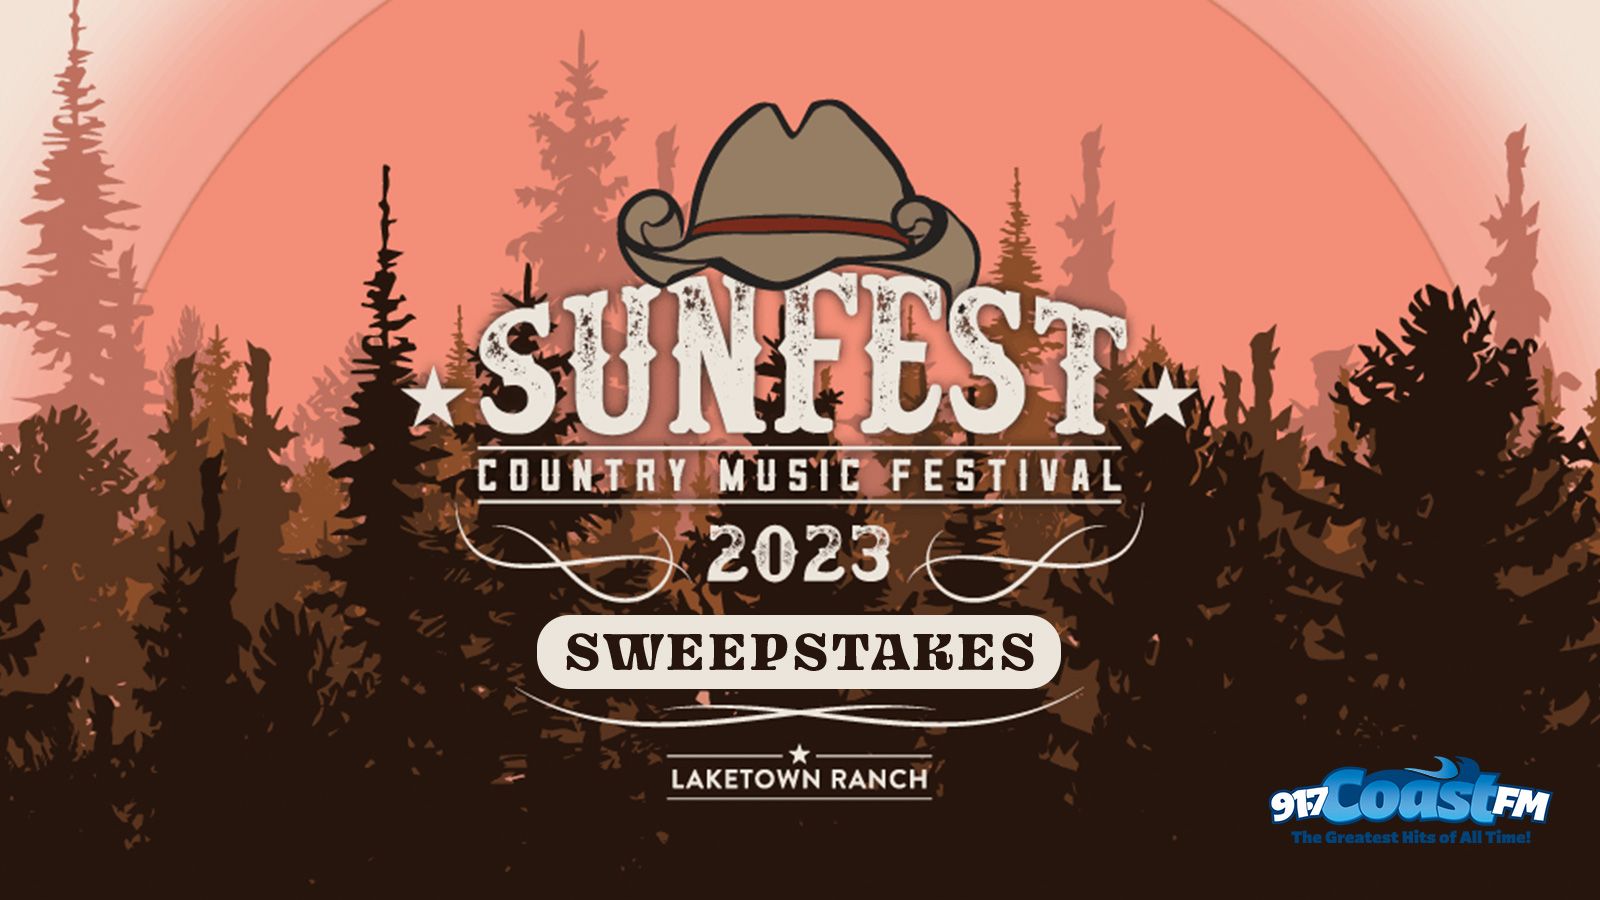 Sunfest Country Music Festival 2023 Sweepstakes Flipboard